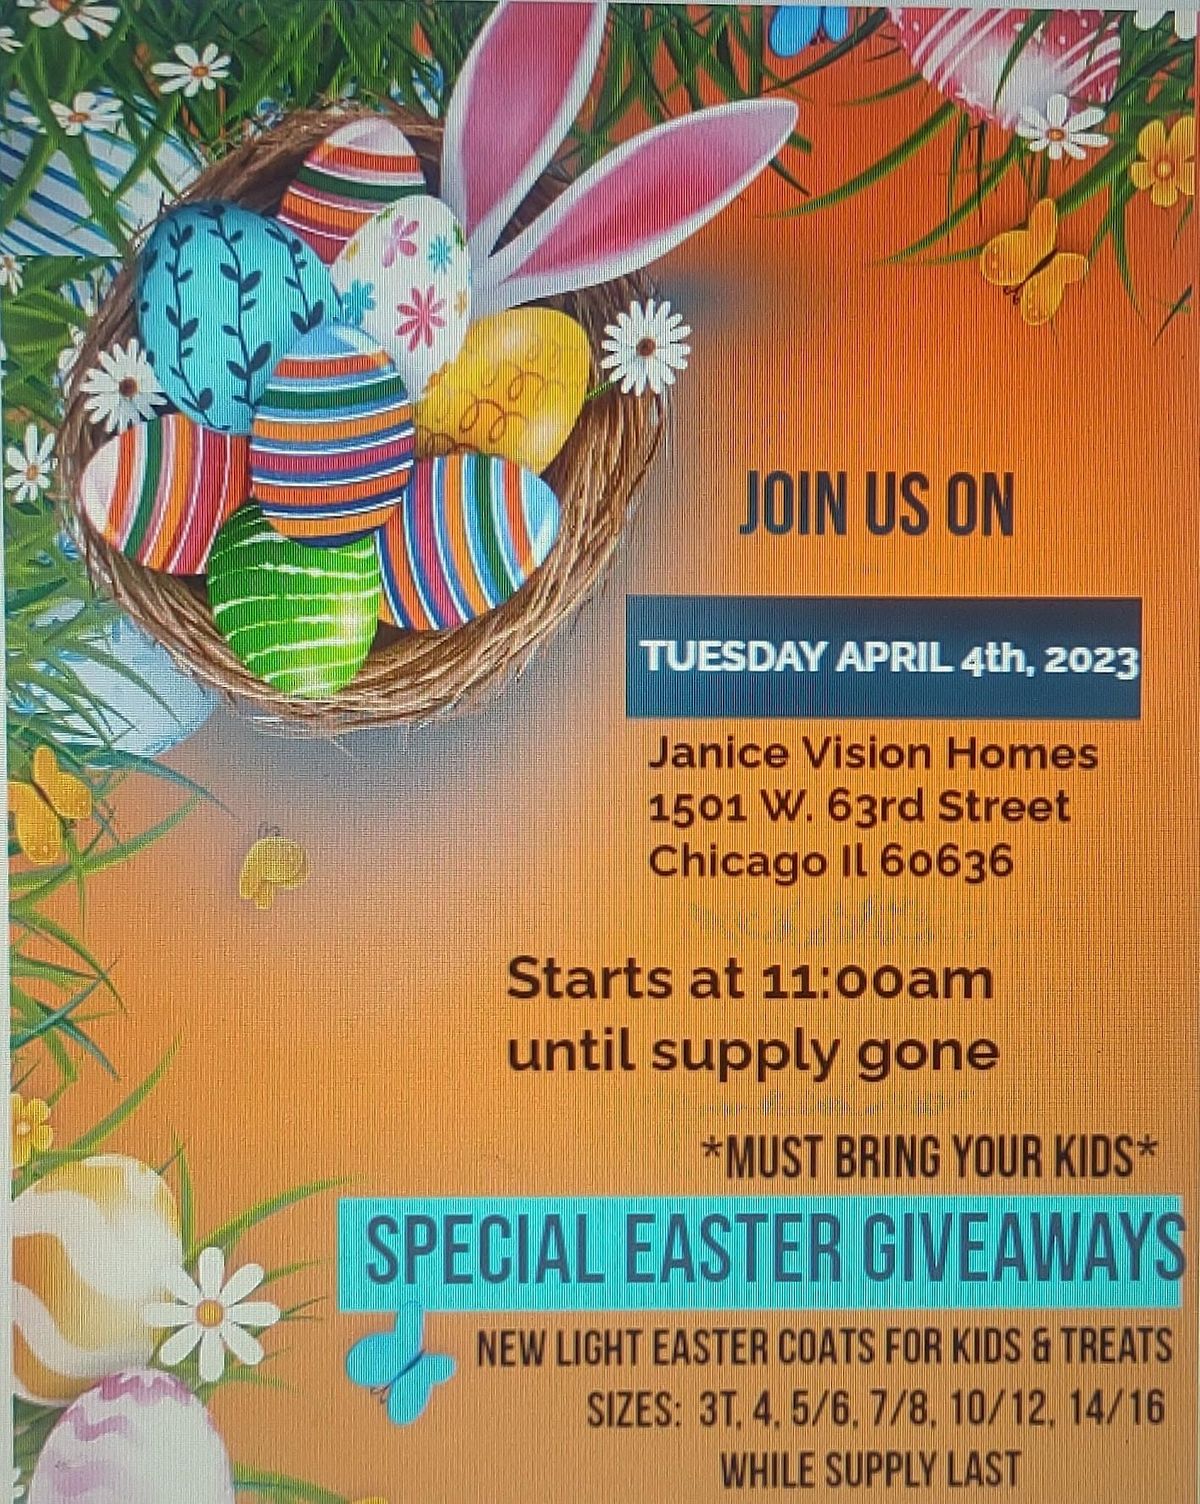 Special Easter giveaways